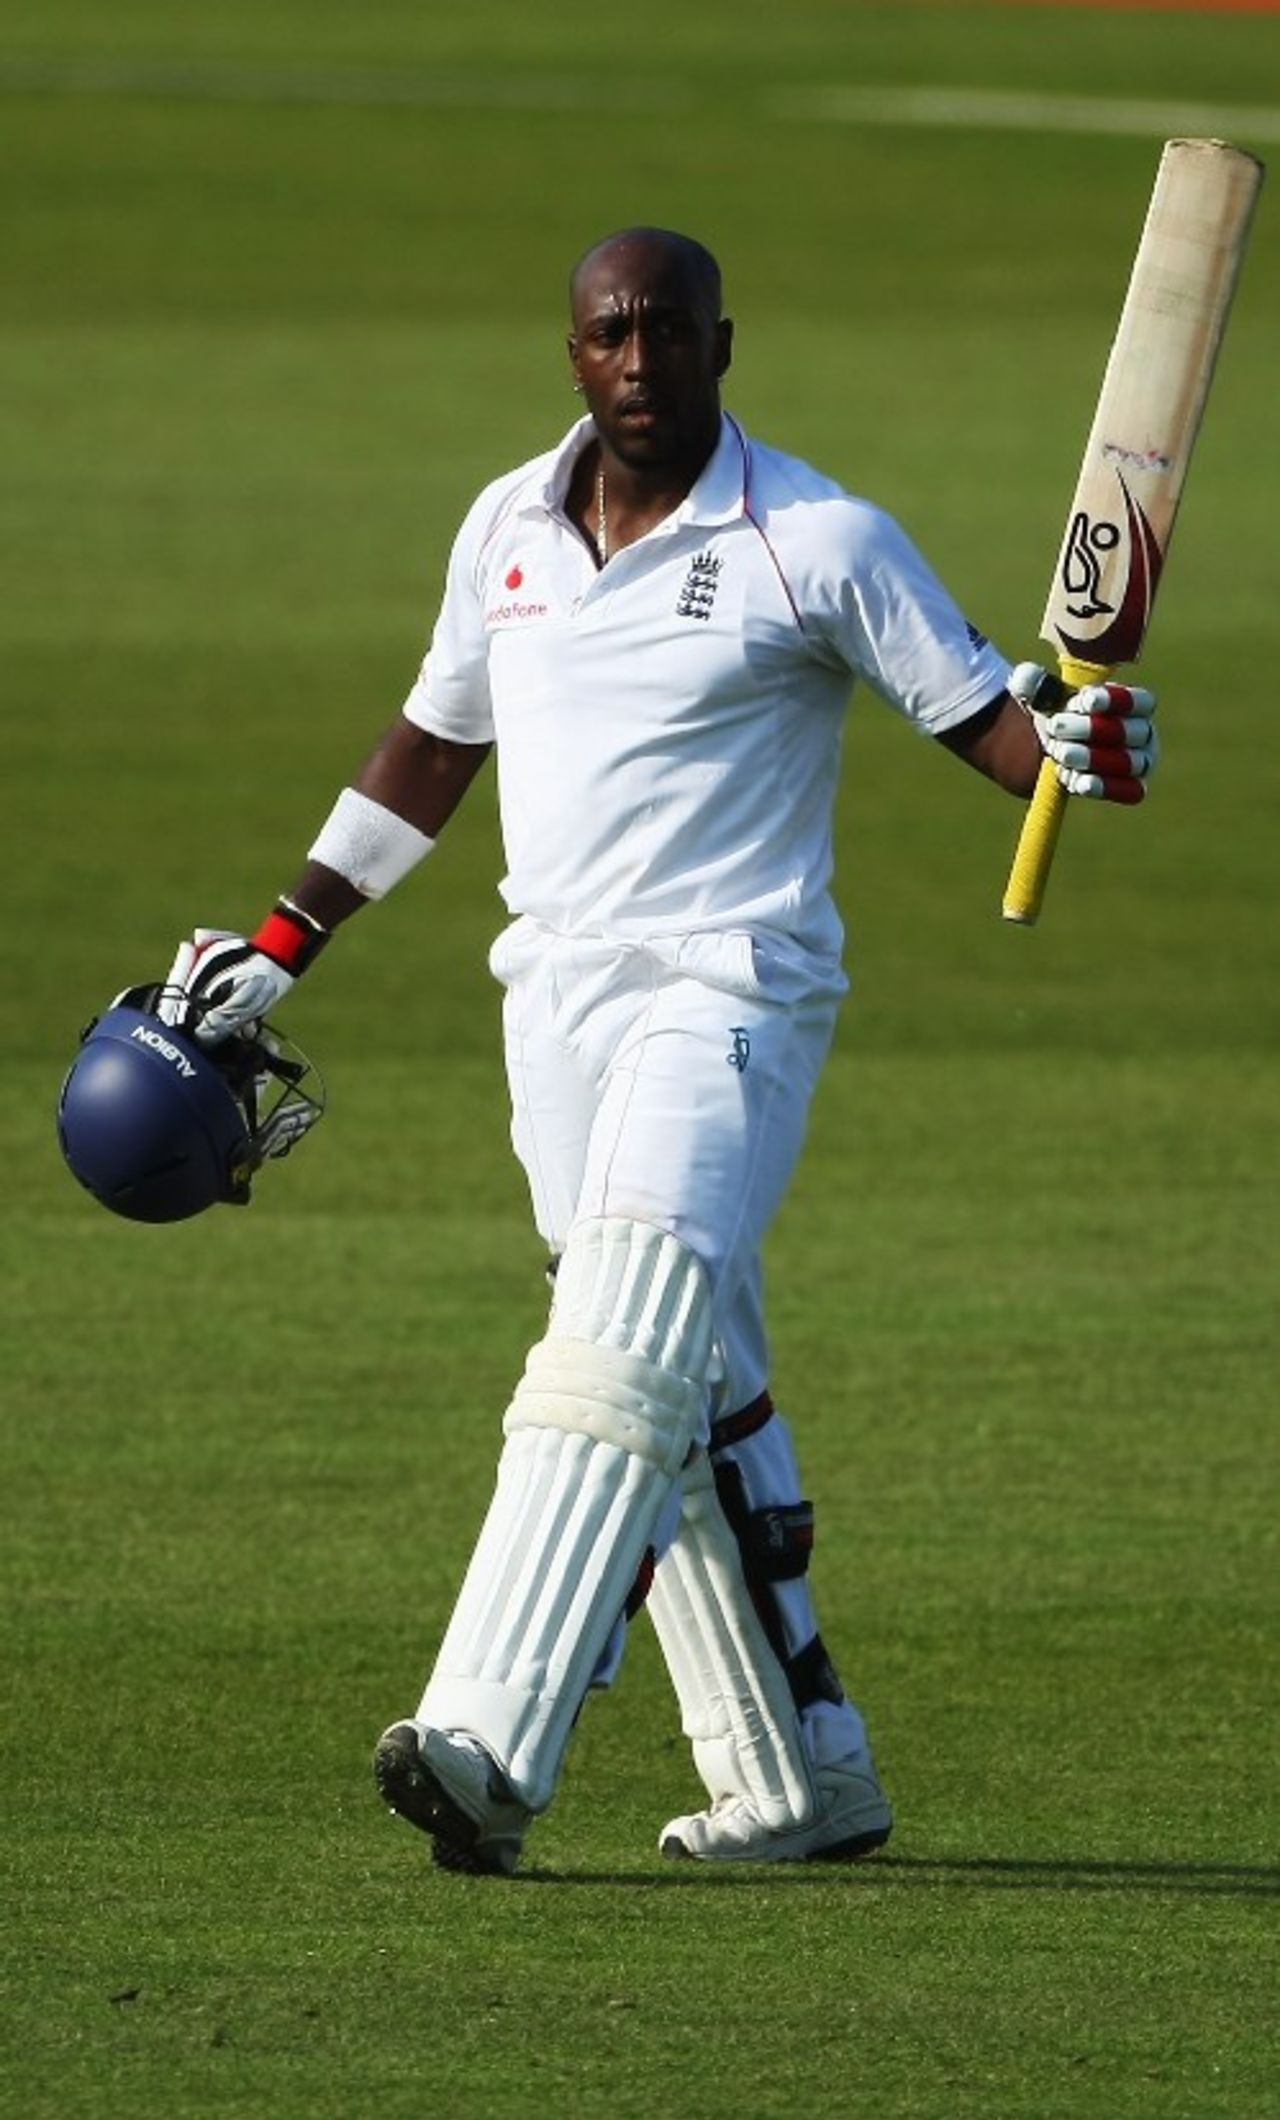 Michael Carberry celebrates his century, England Lions v New Zealanders, The Rose Bowl, May 10, 2008